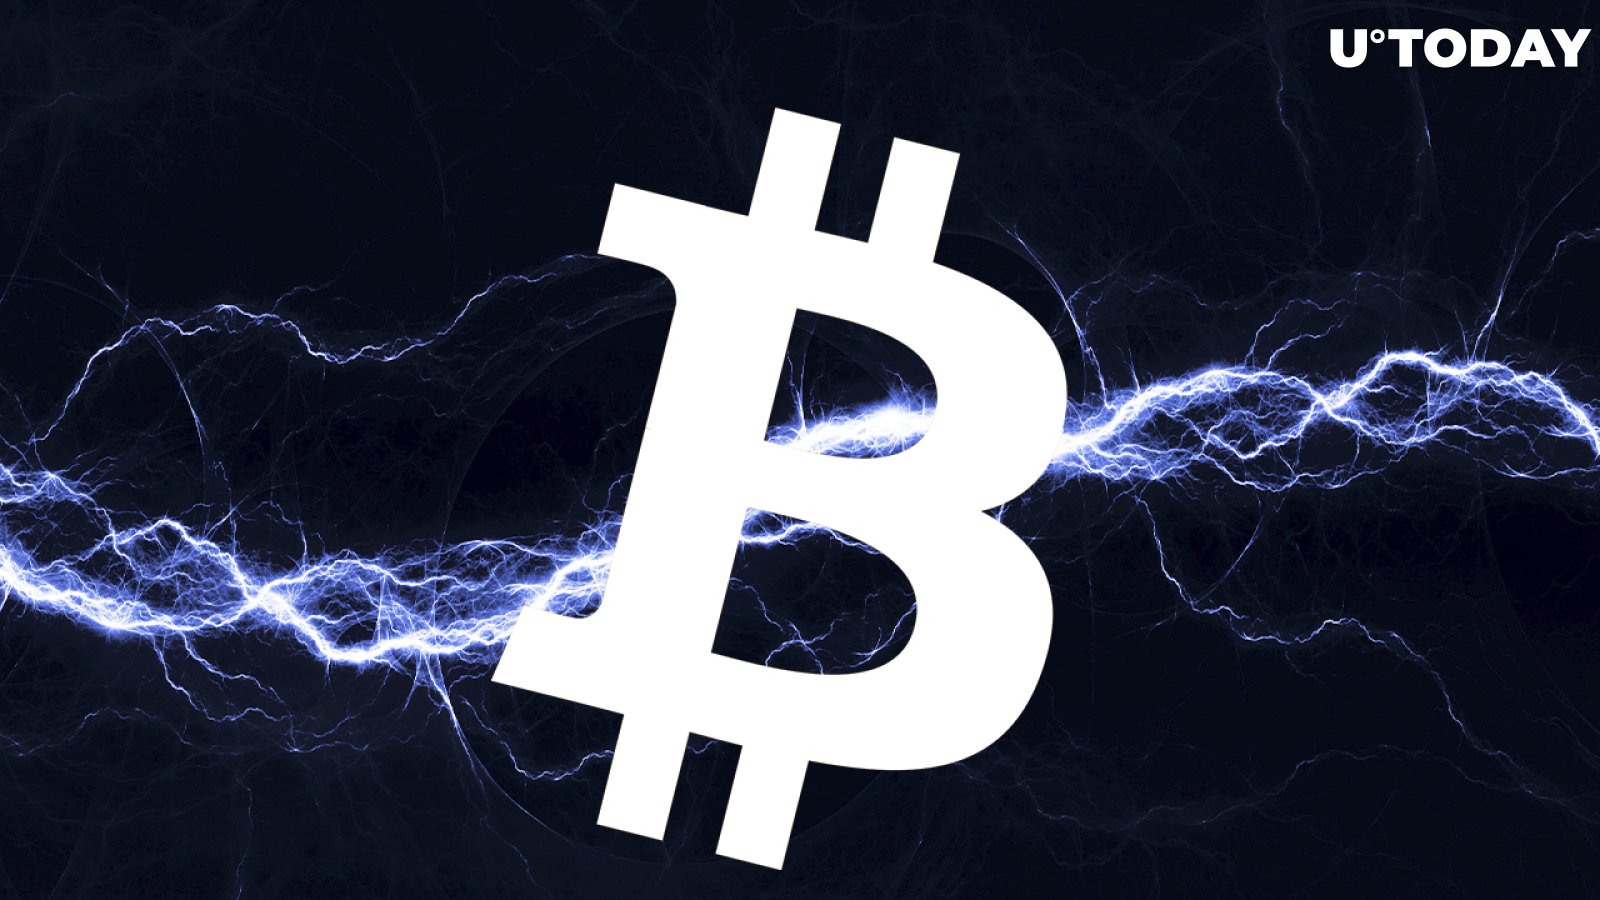 Bitcoin Lightning Surpasses Liquid by Capacity for First Time Ever: Here's What This Means